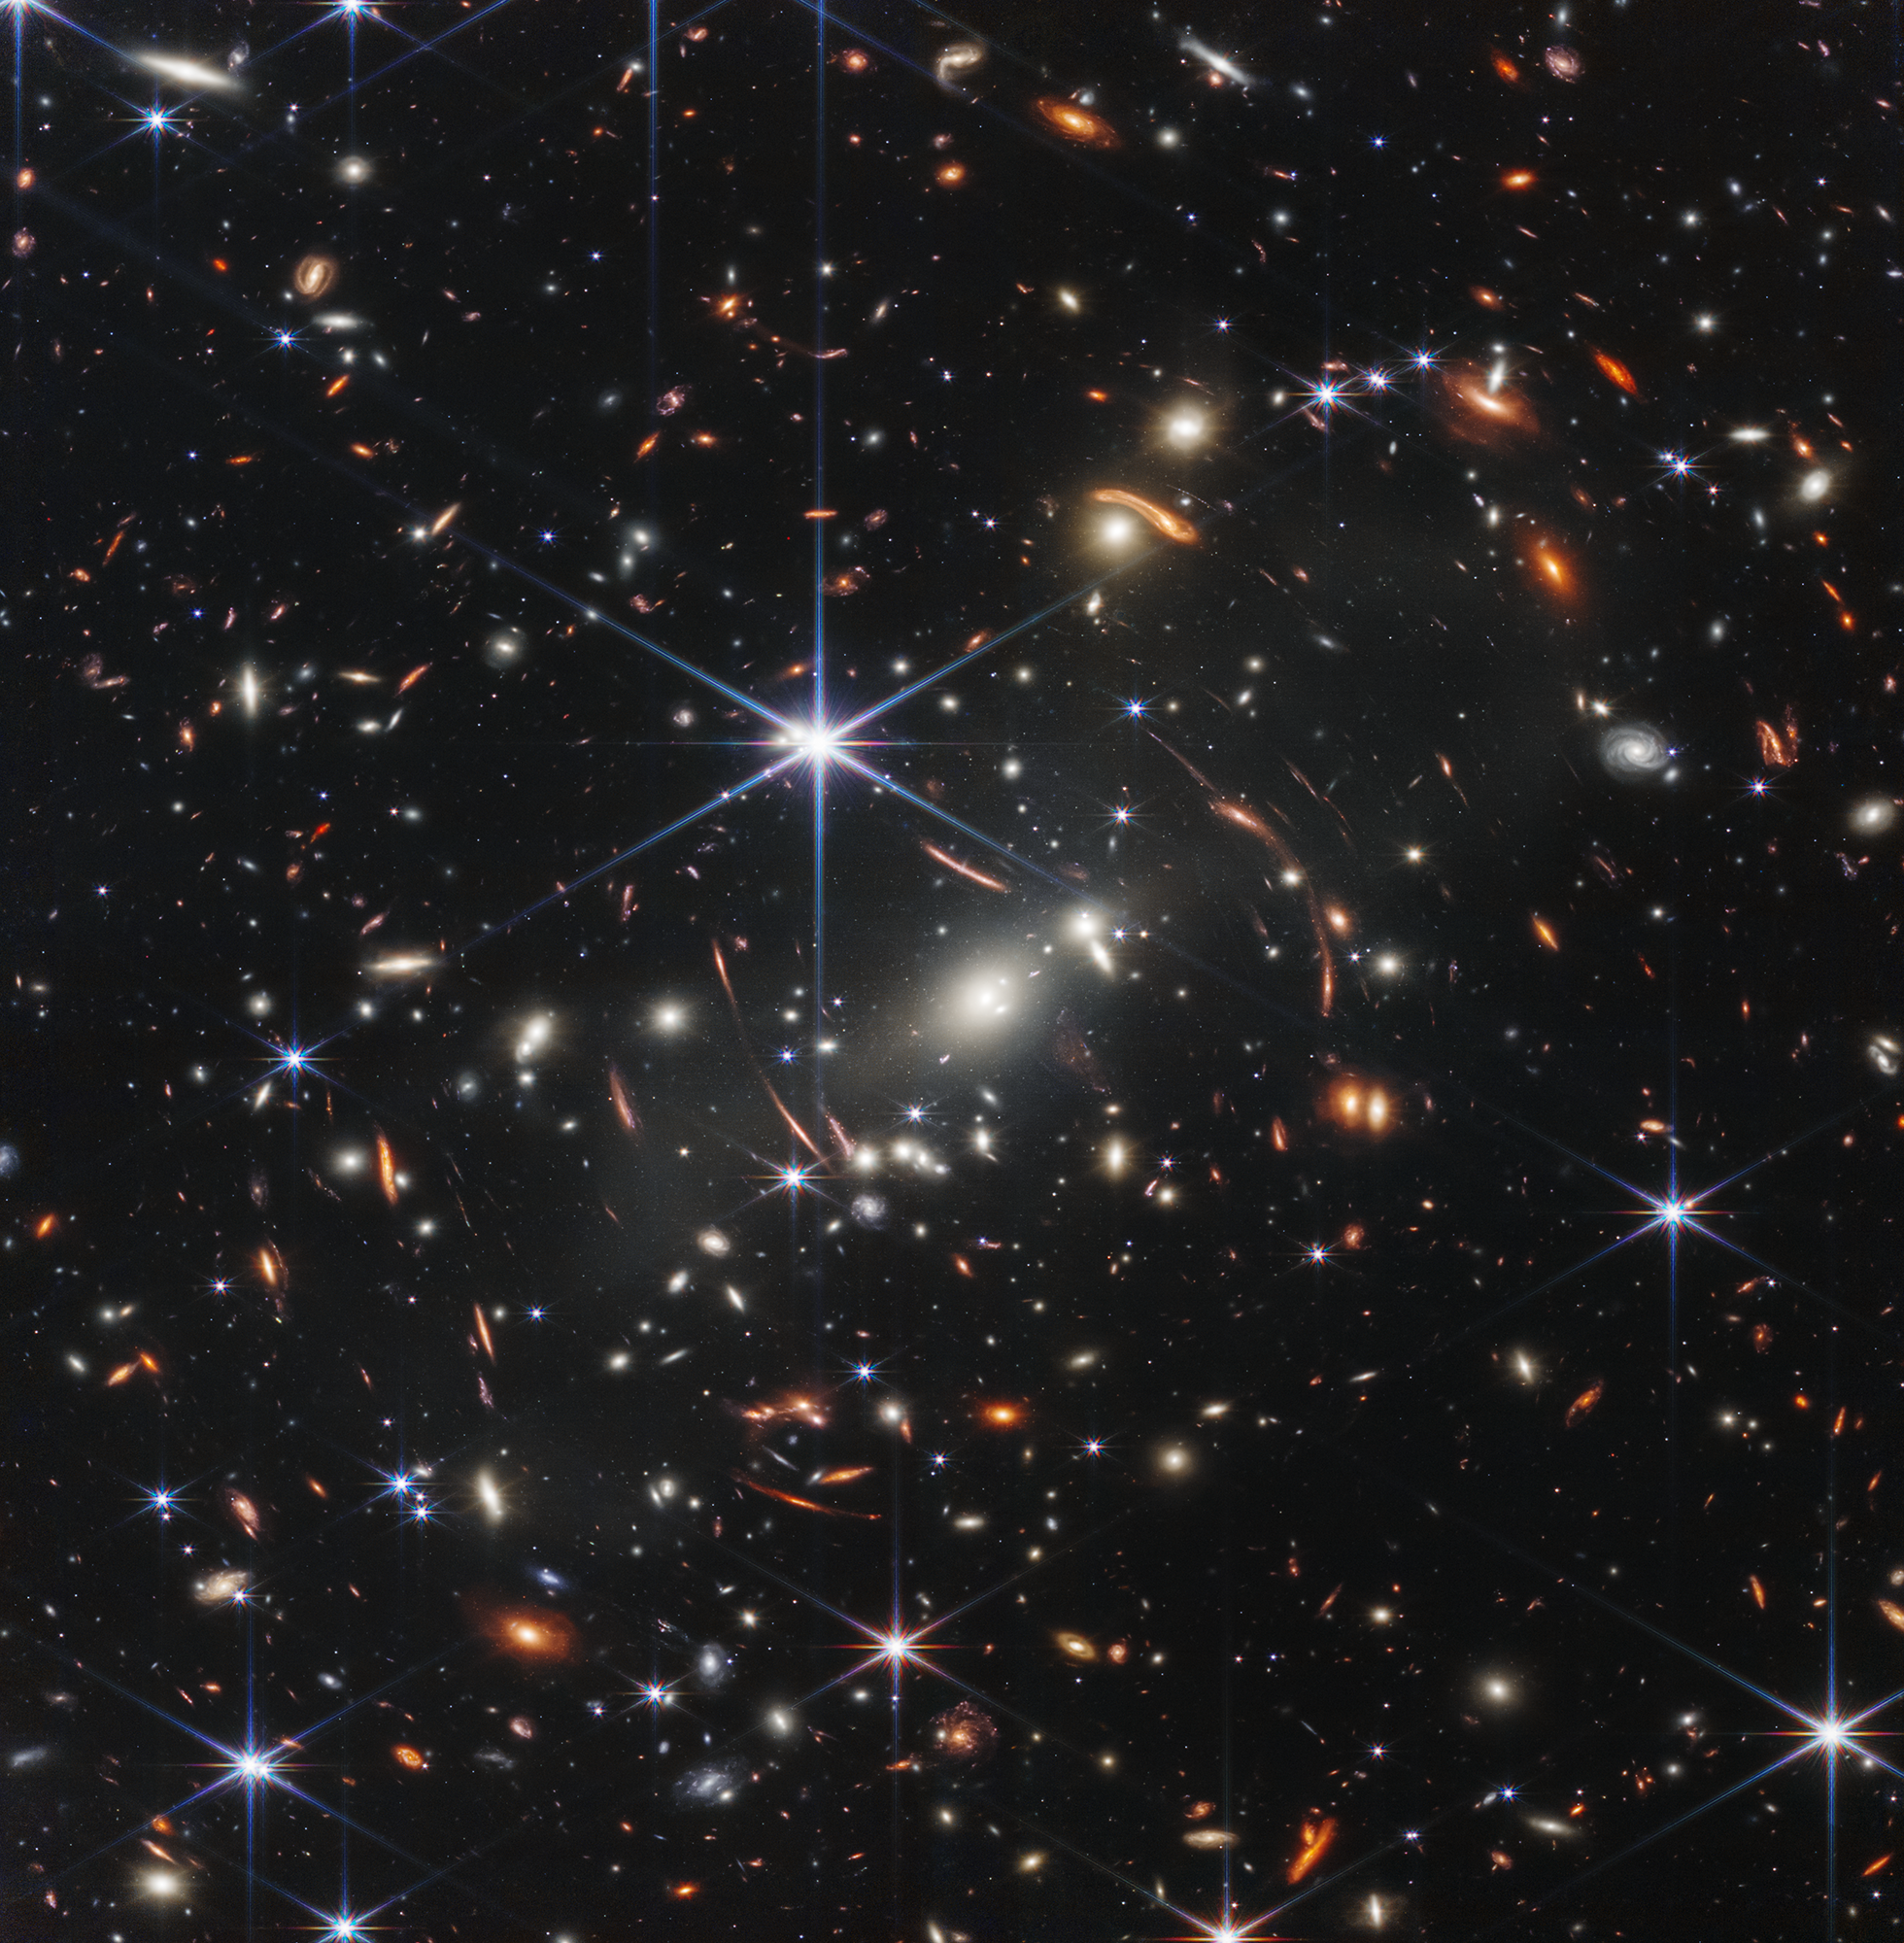 Thousands of small galaxies appear across this view. Their colors vary. Some are shades of orange, while others are white. Most appear as fuzzy ovals, but a few have distinct spiral arms. In front of the galaxies are several foreground stars. Most appear blue, and the bright stars have diffraction spikes, forming an eight-pointed star shape. There are also many thin, long, orange arcs that curve around the center of the image.